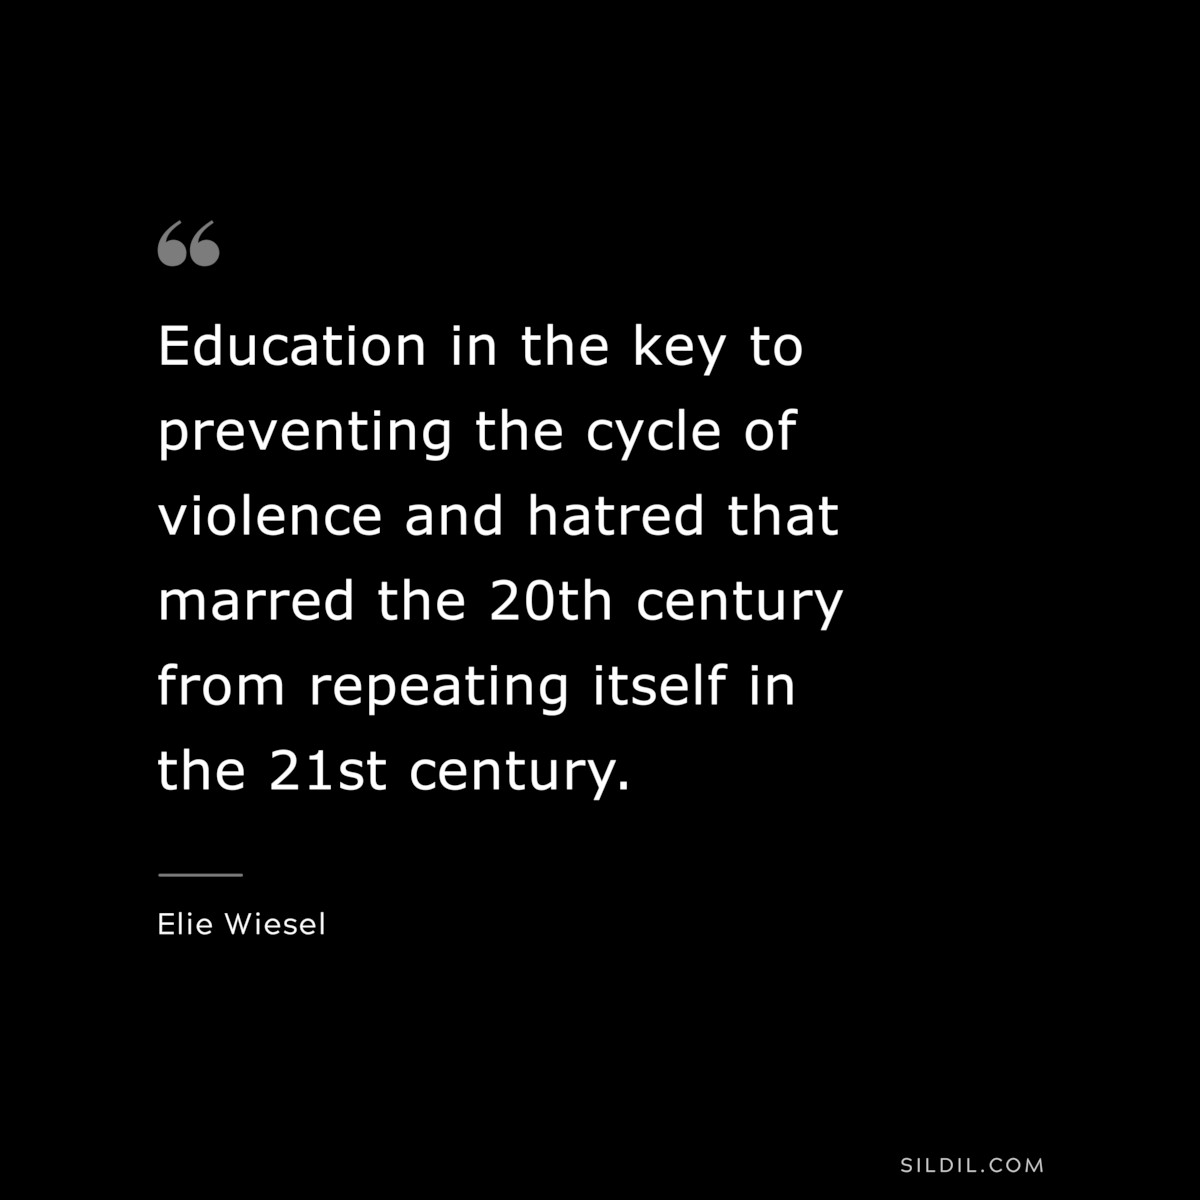 Education in the key to preventing the cycle of violence and hatred that marred the 20th century from repeating itself in the 21st century. ― Elie Wiesel